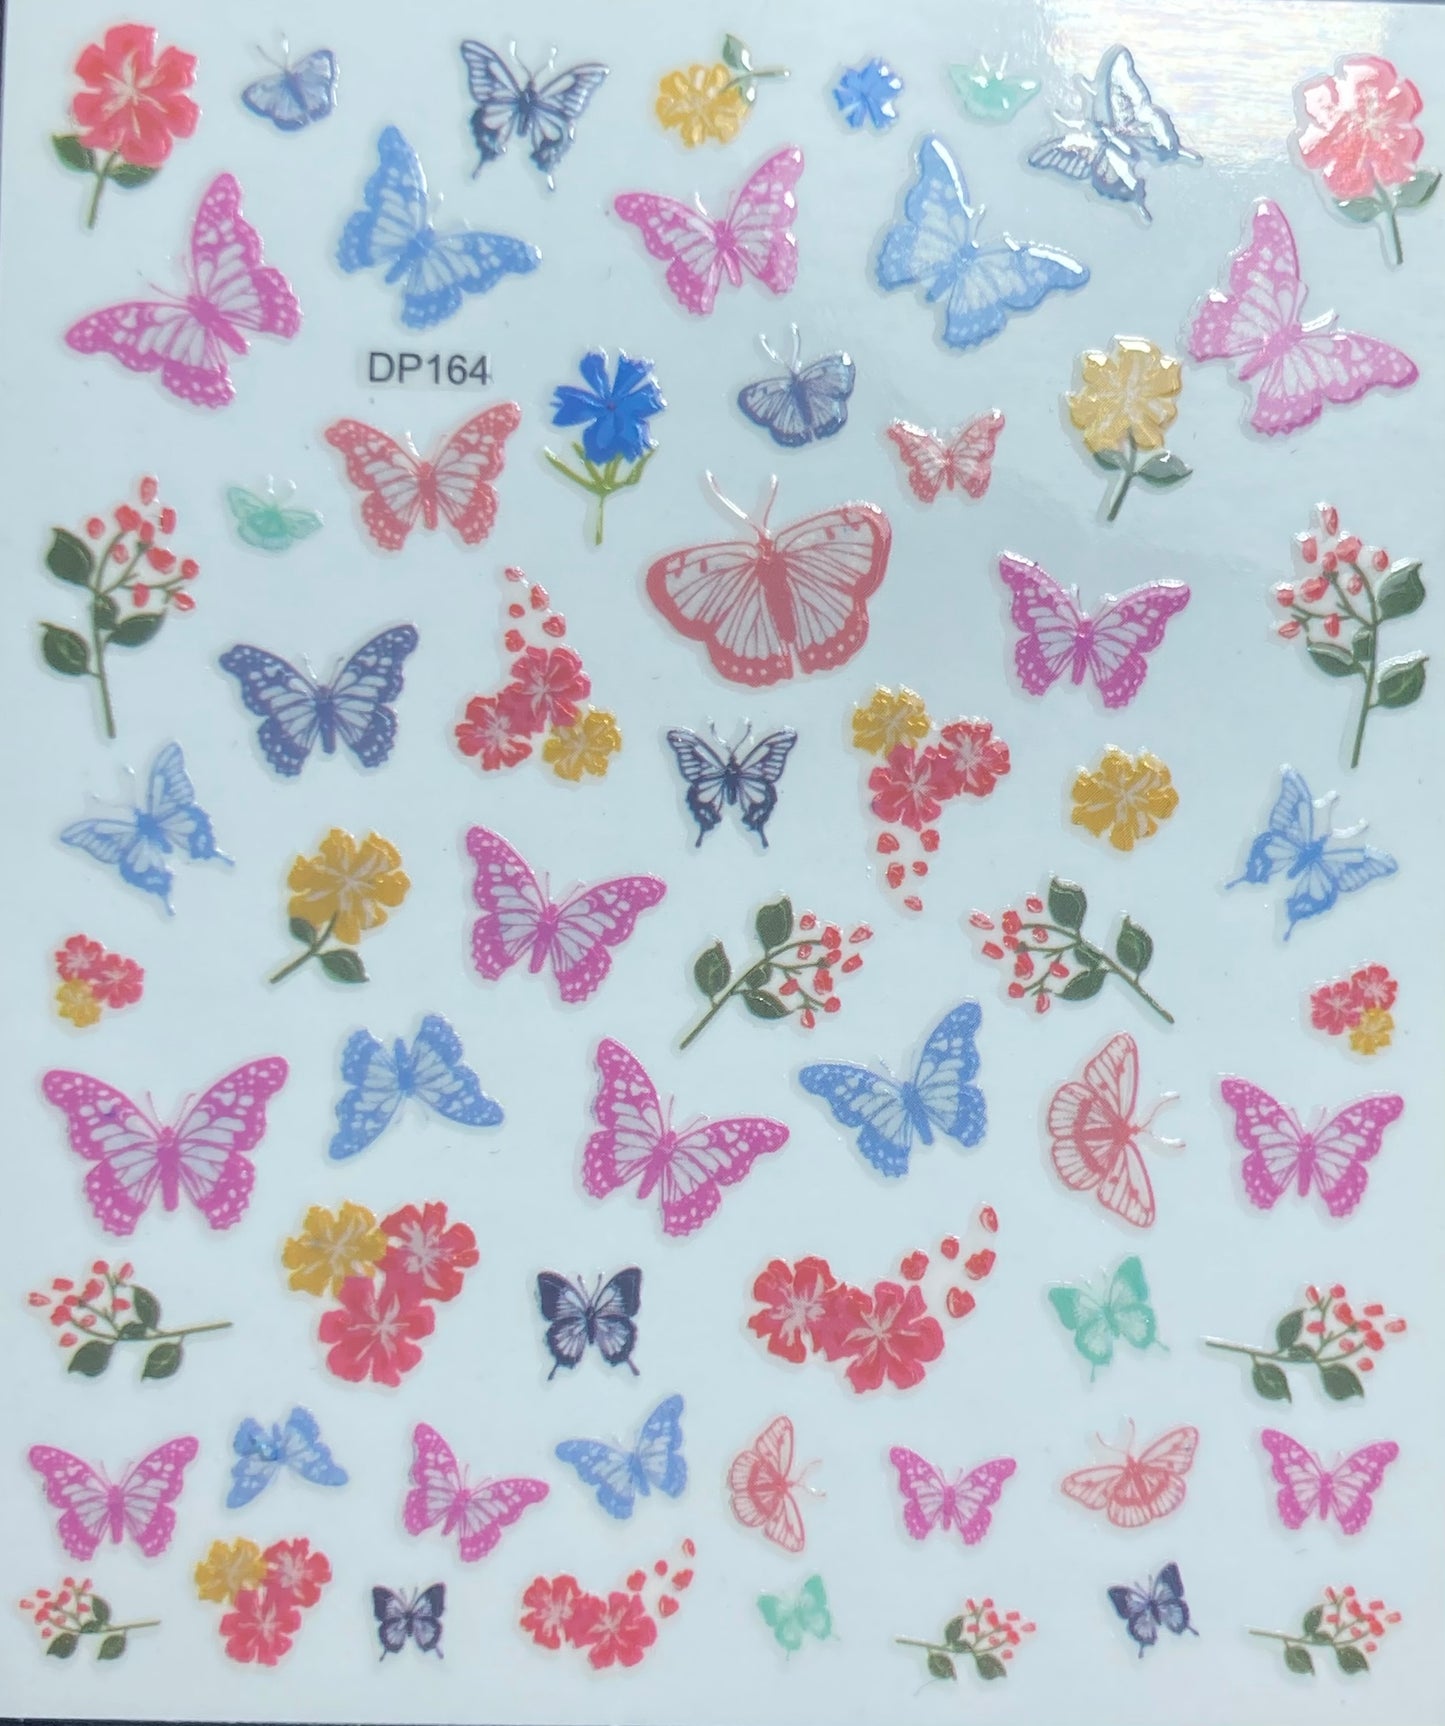 Holographic Butterfly's Nail Art stickers DP164